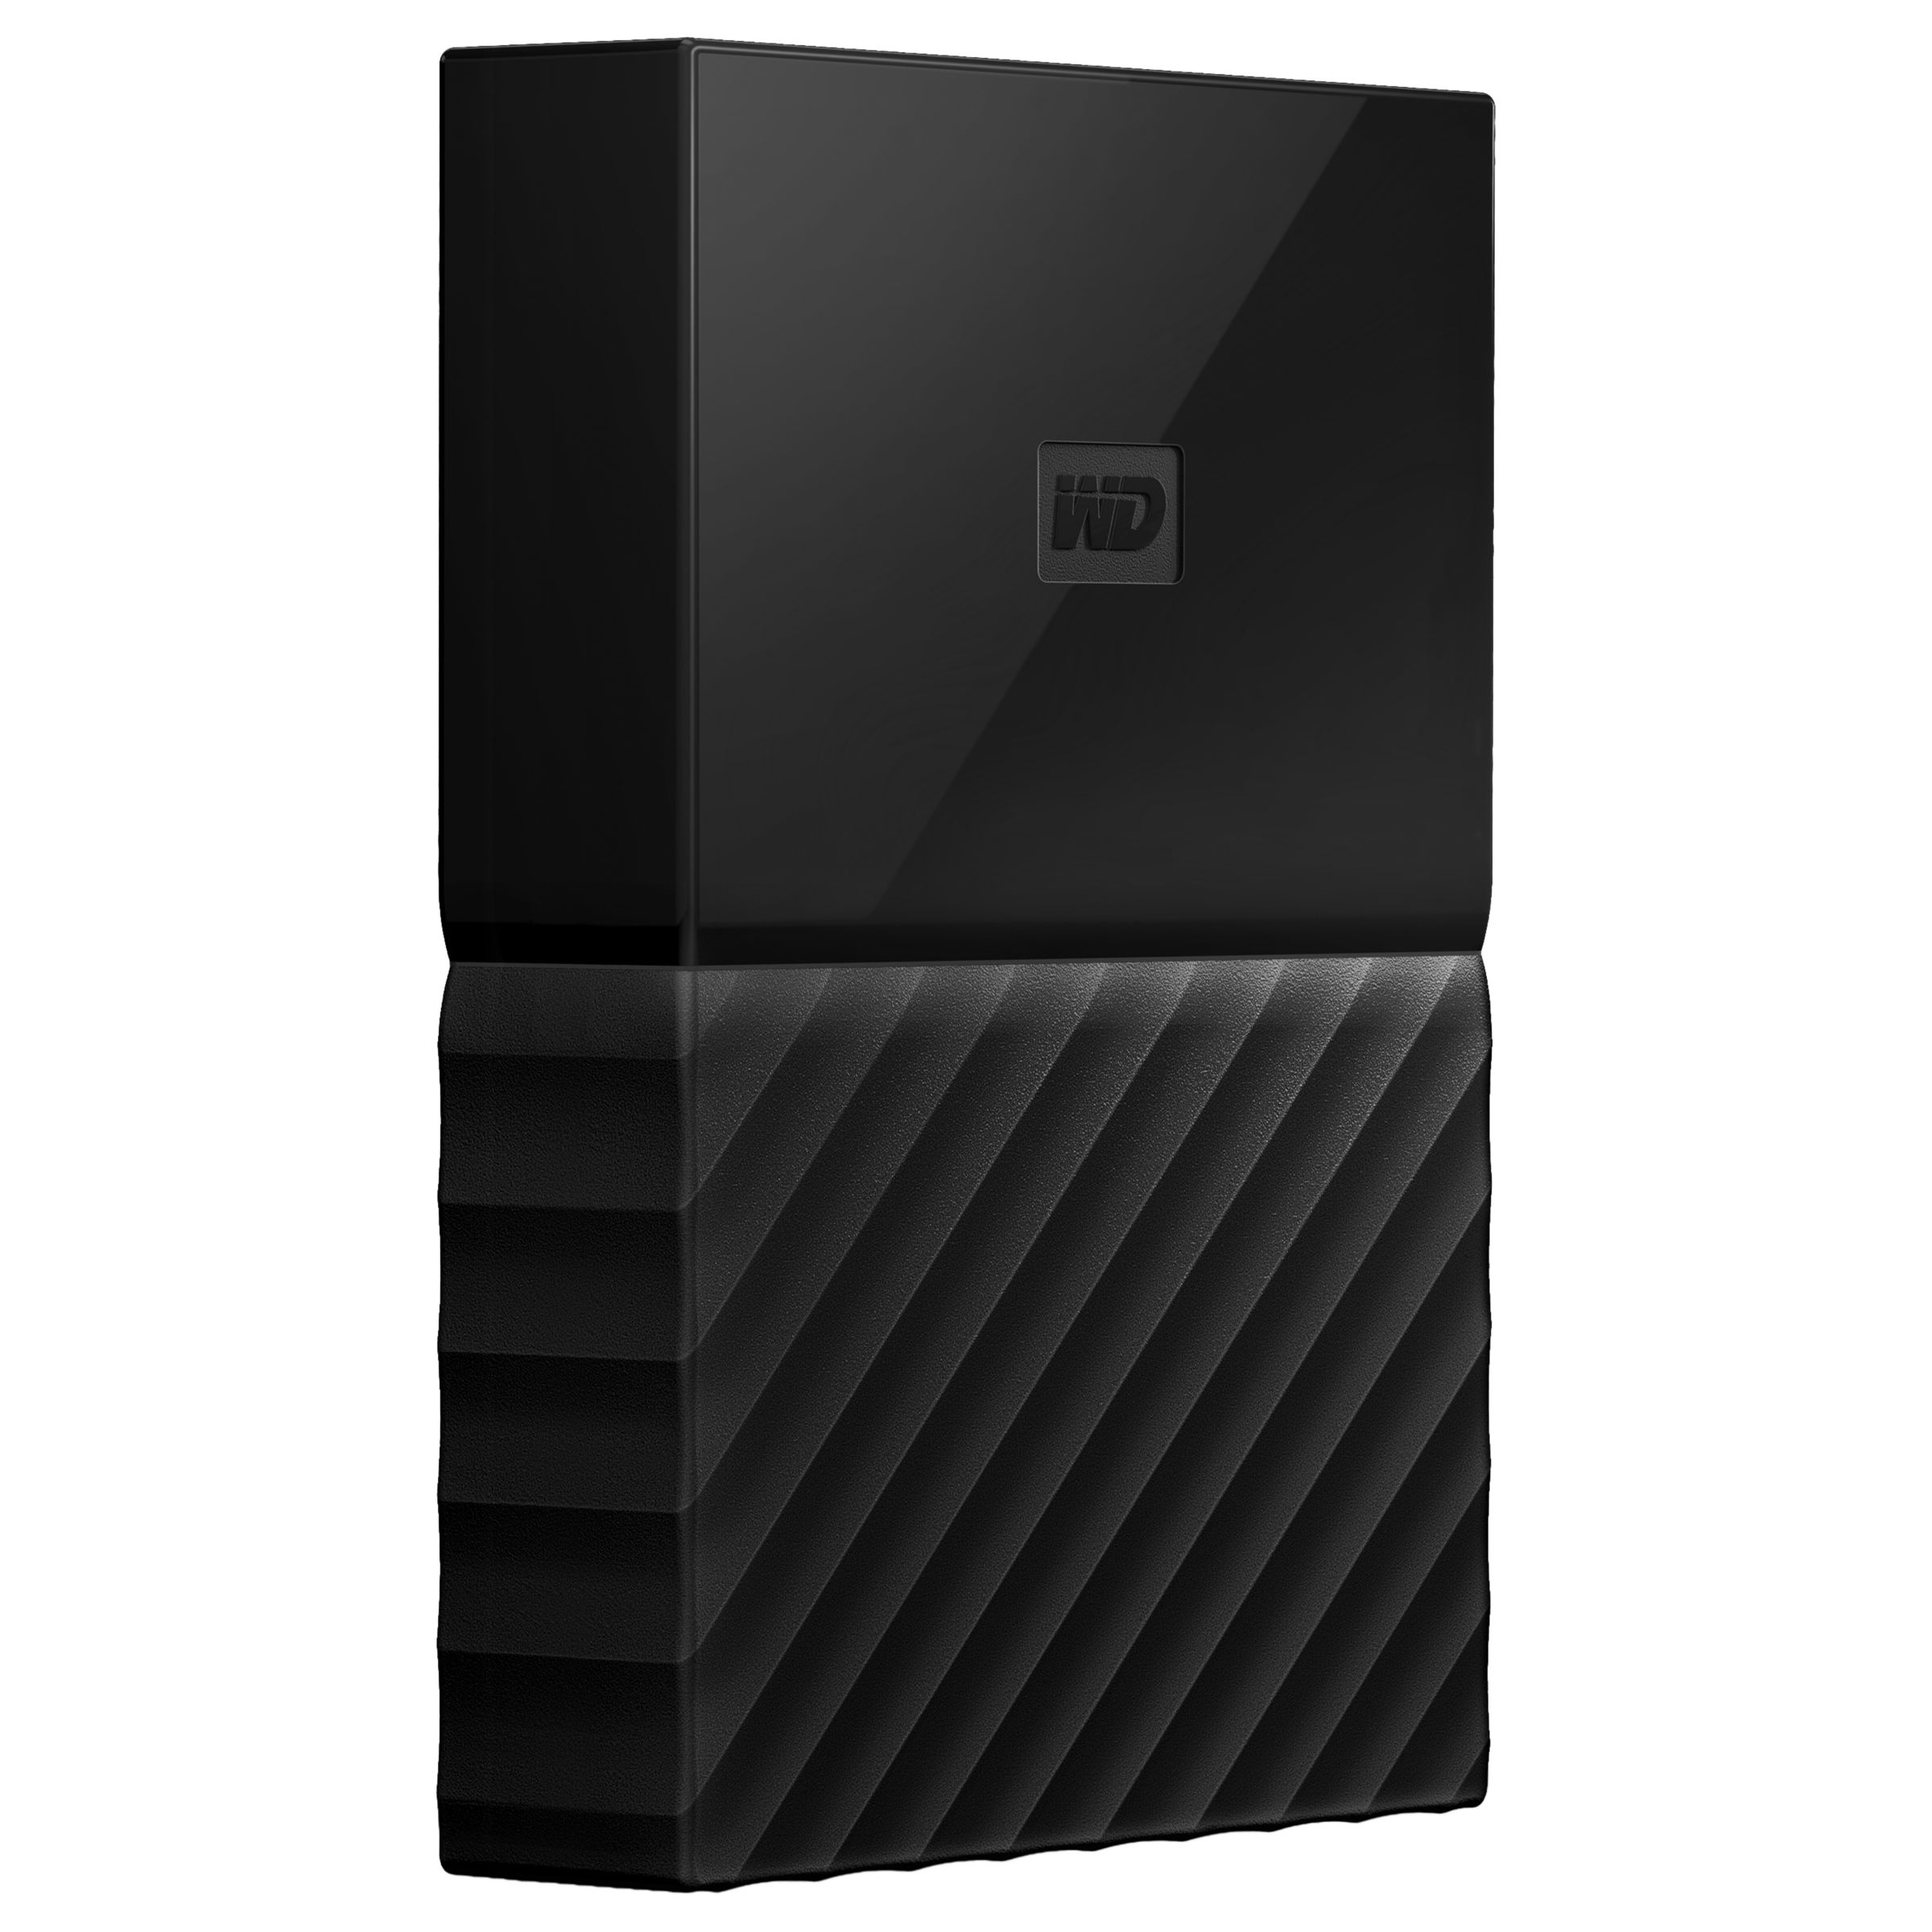 paragon driver for wd passport mac